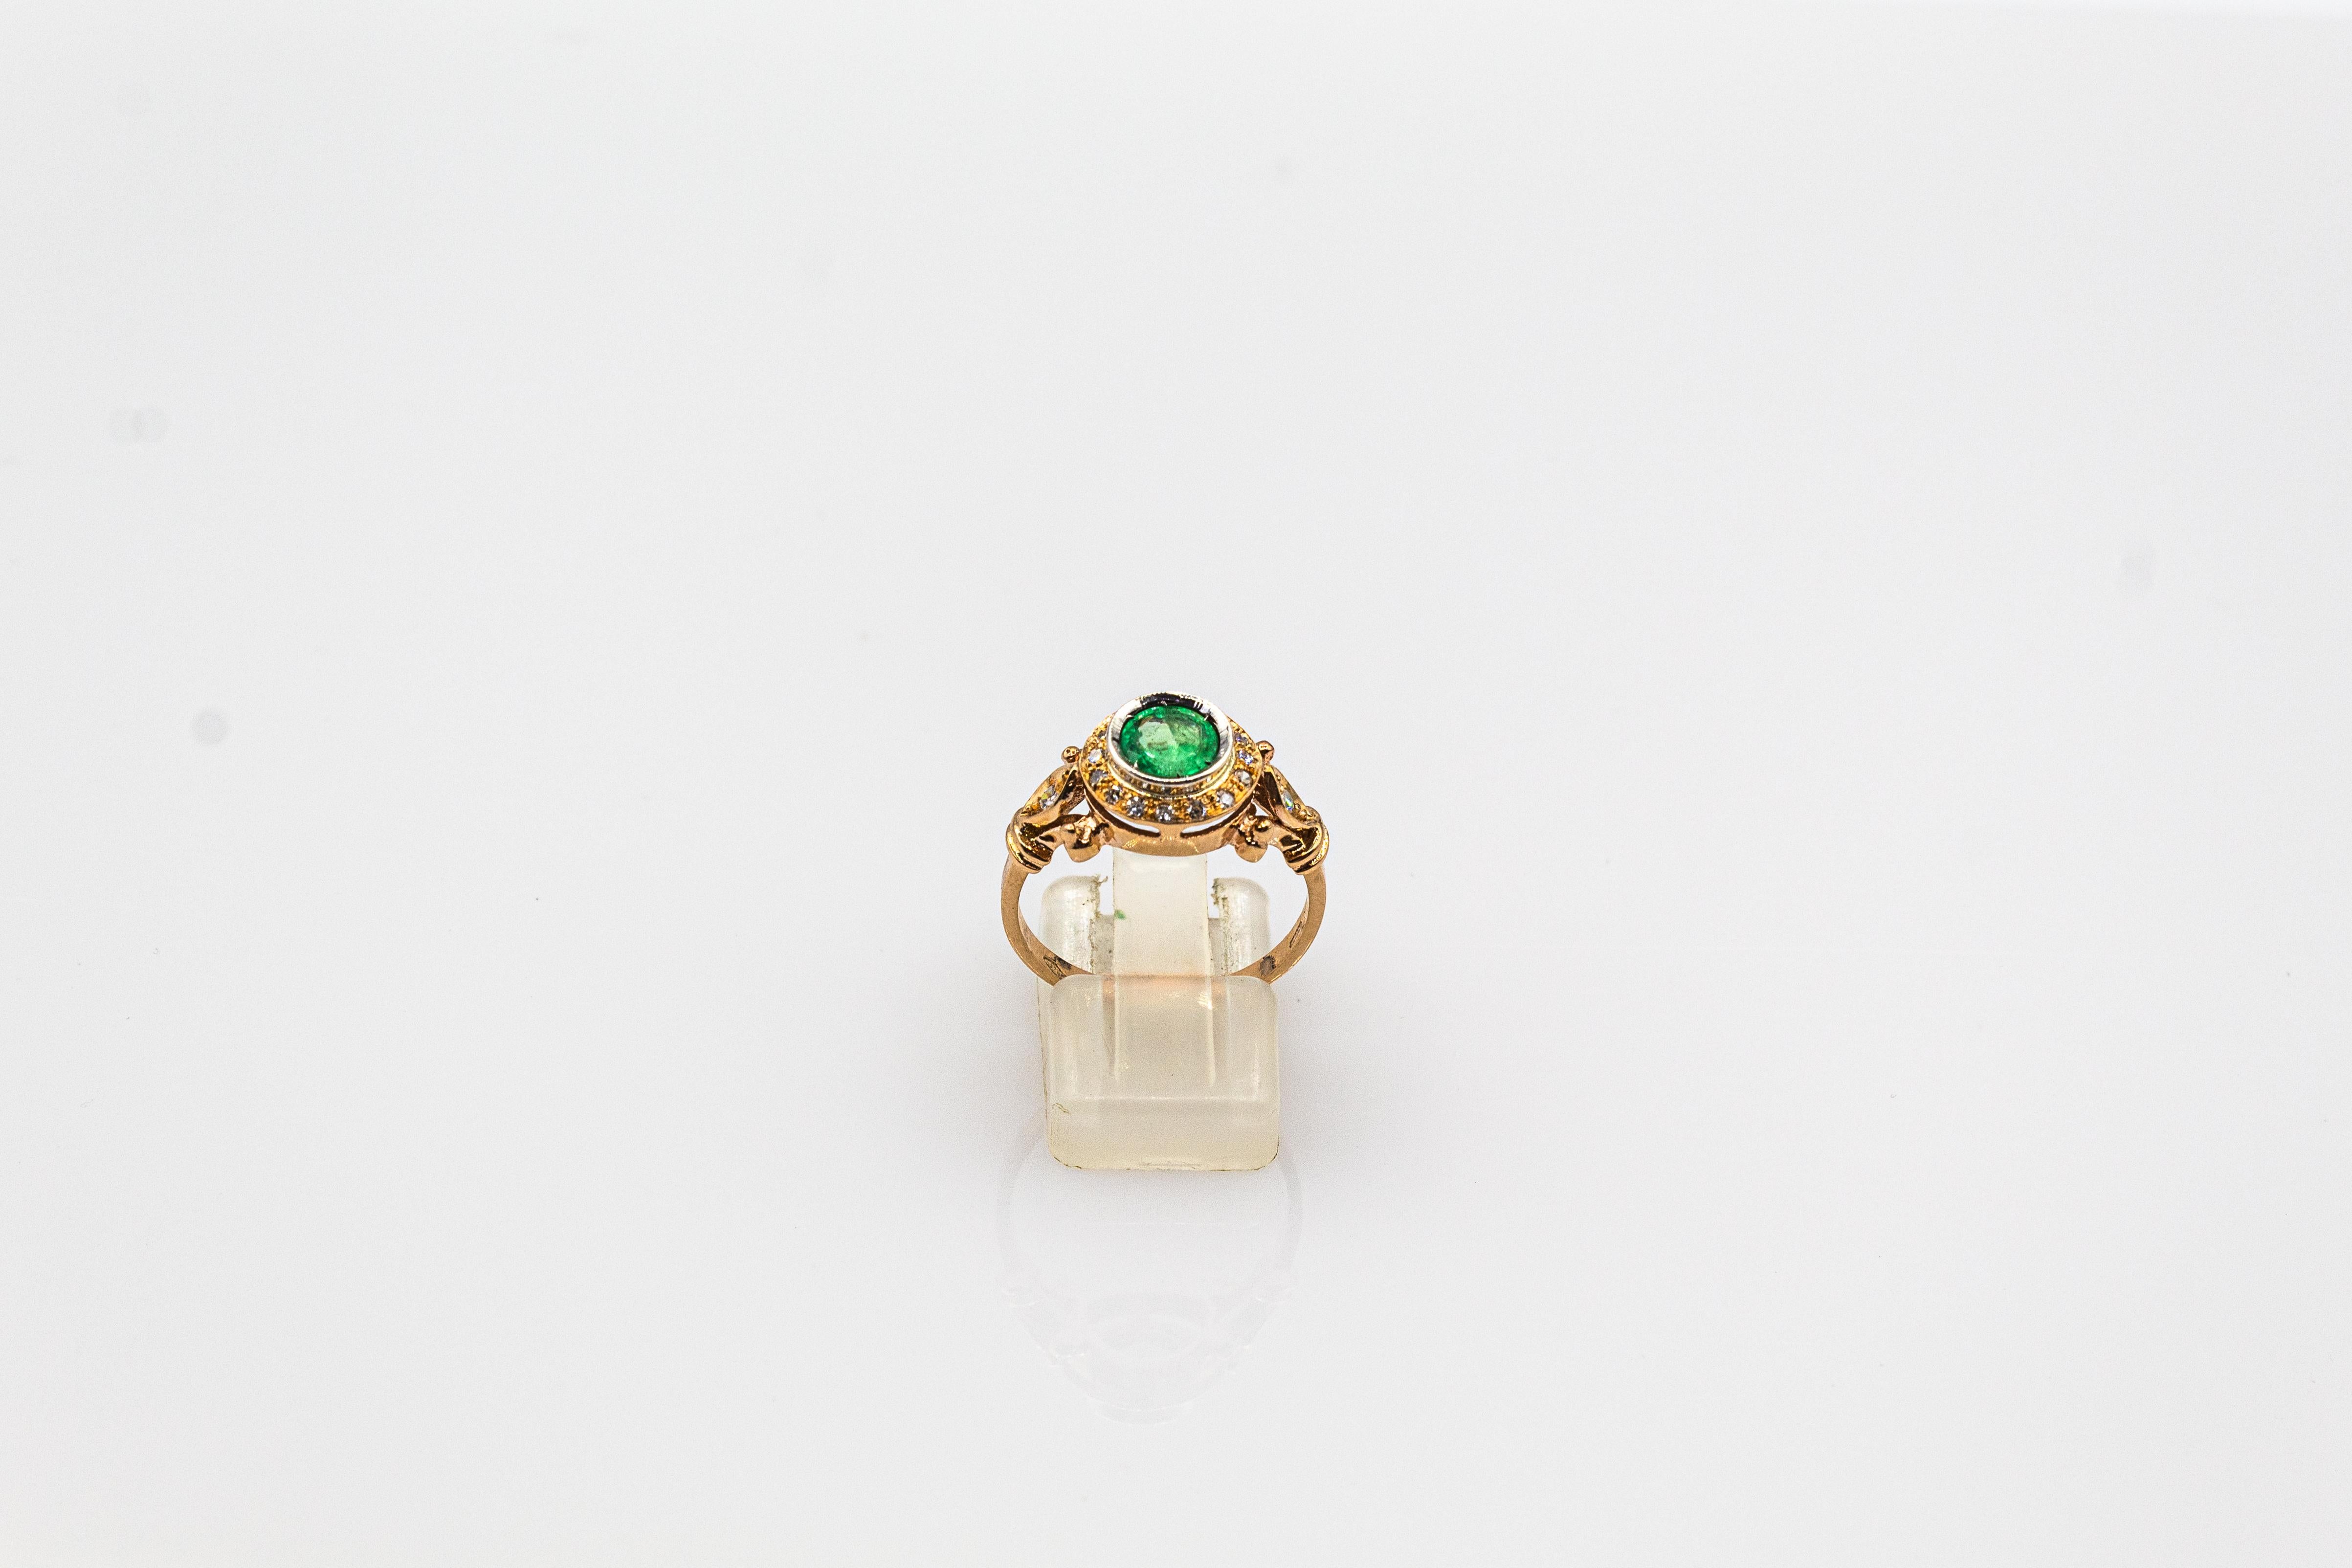 This Ring is made of 9K Yellow Gold and Sterling Silver.
This Ring has 0.17 Carats of White Brilliant Cut Diamonds.
This Ring has a 0.50 Carats Modern Round Cut Emerald.

This Ring is available also in 14 or 18K Yellow or White Gold.
This Ring is